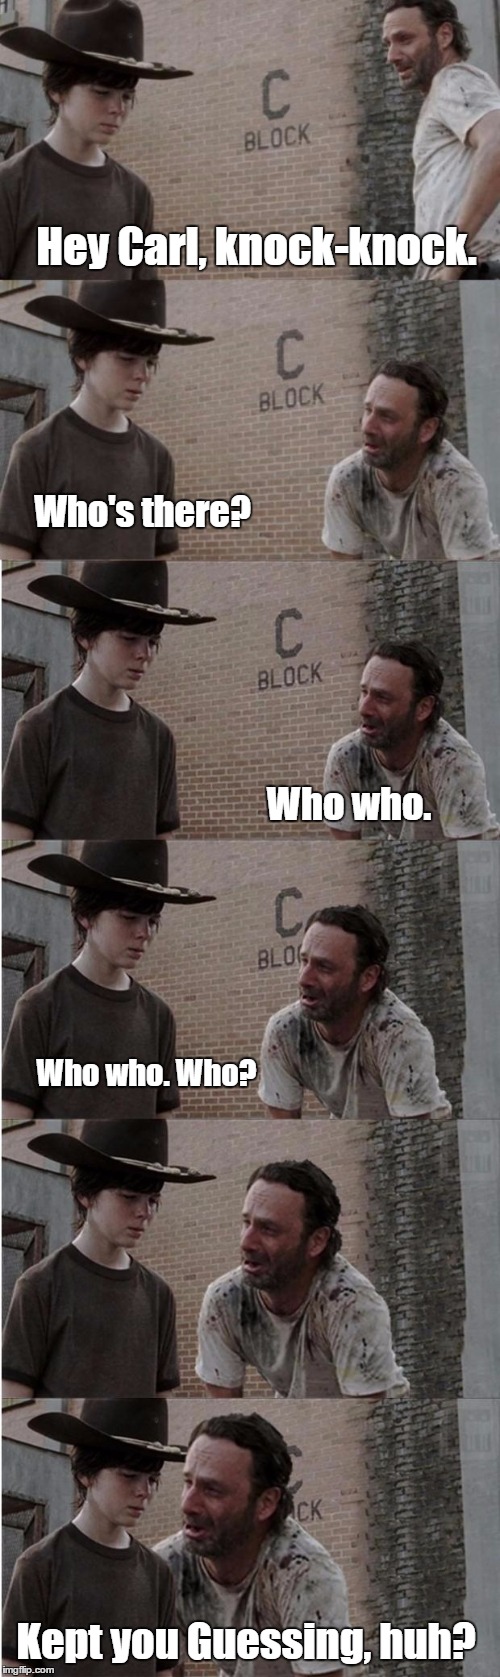 Rick and Carl Longer | Hey Carl, knock-knock. Who's there? Who who. Who who. Who? Kept you Guessing, huh? | image tagged in memes,rick and carl longer | made w/ Imgflip meme maker